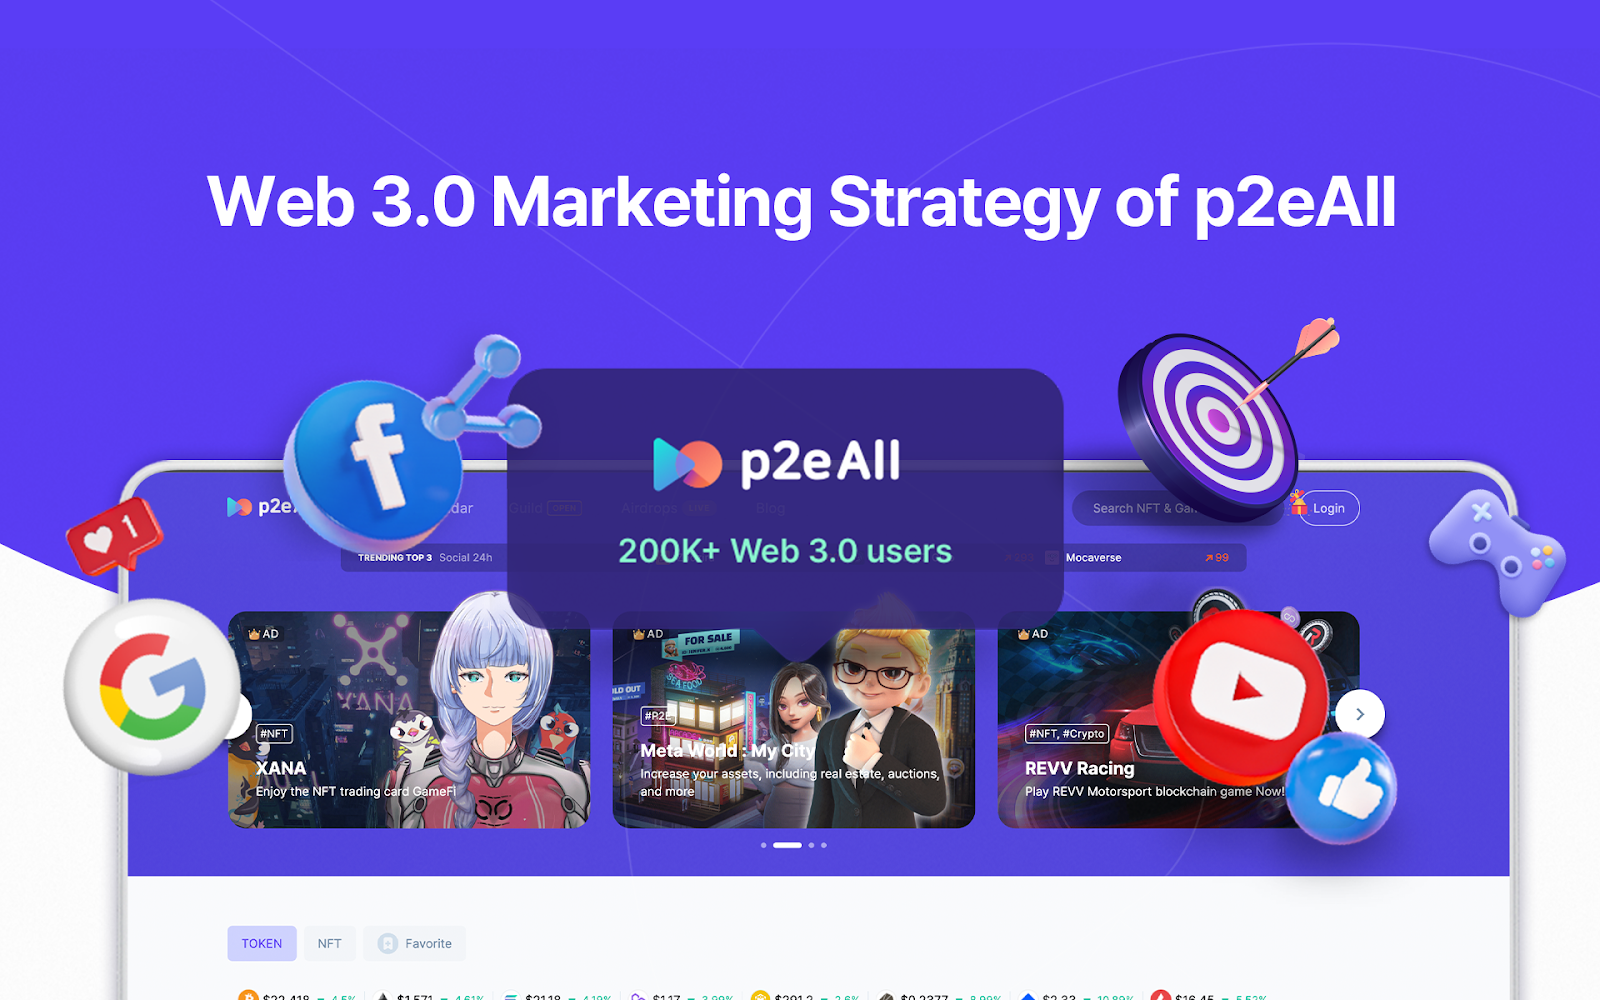 Web 3.0 marketing strategy for p2eAll